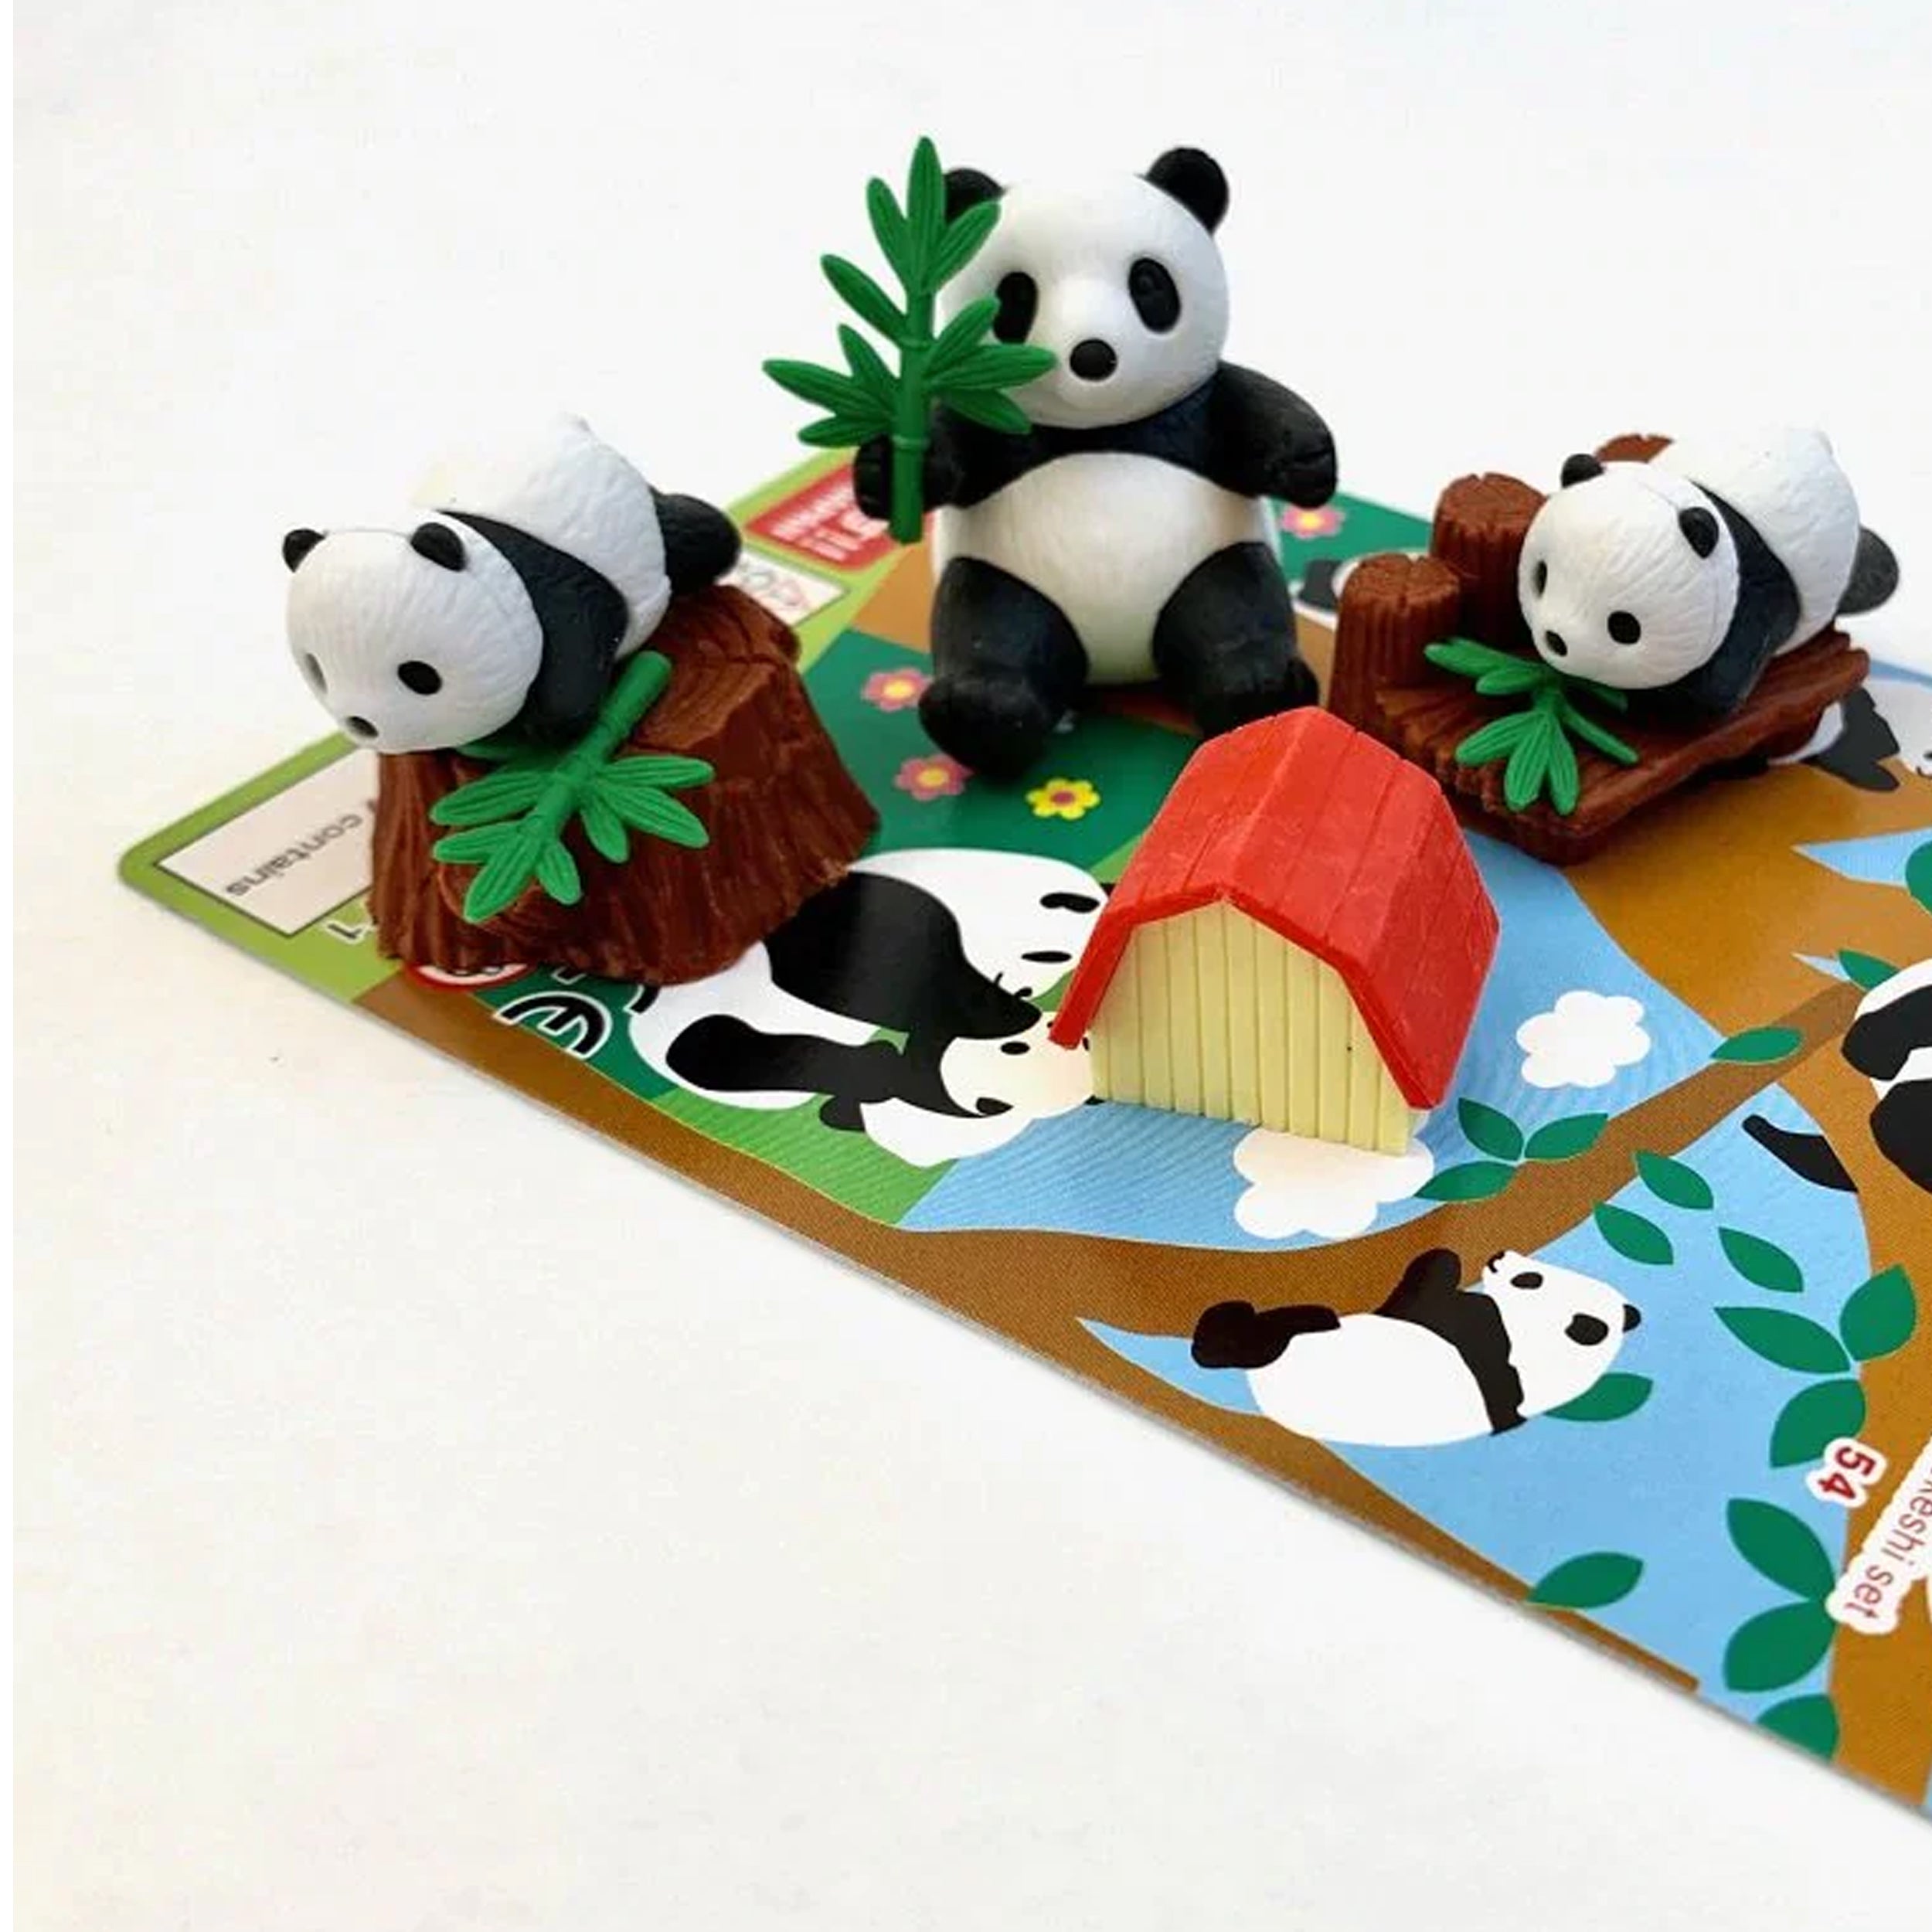 Get Creative with Cute Panda 3D Easter Gift Eraser Stationery Set For Kids